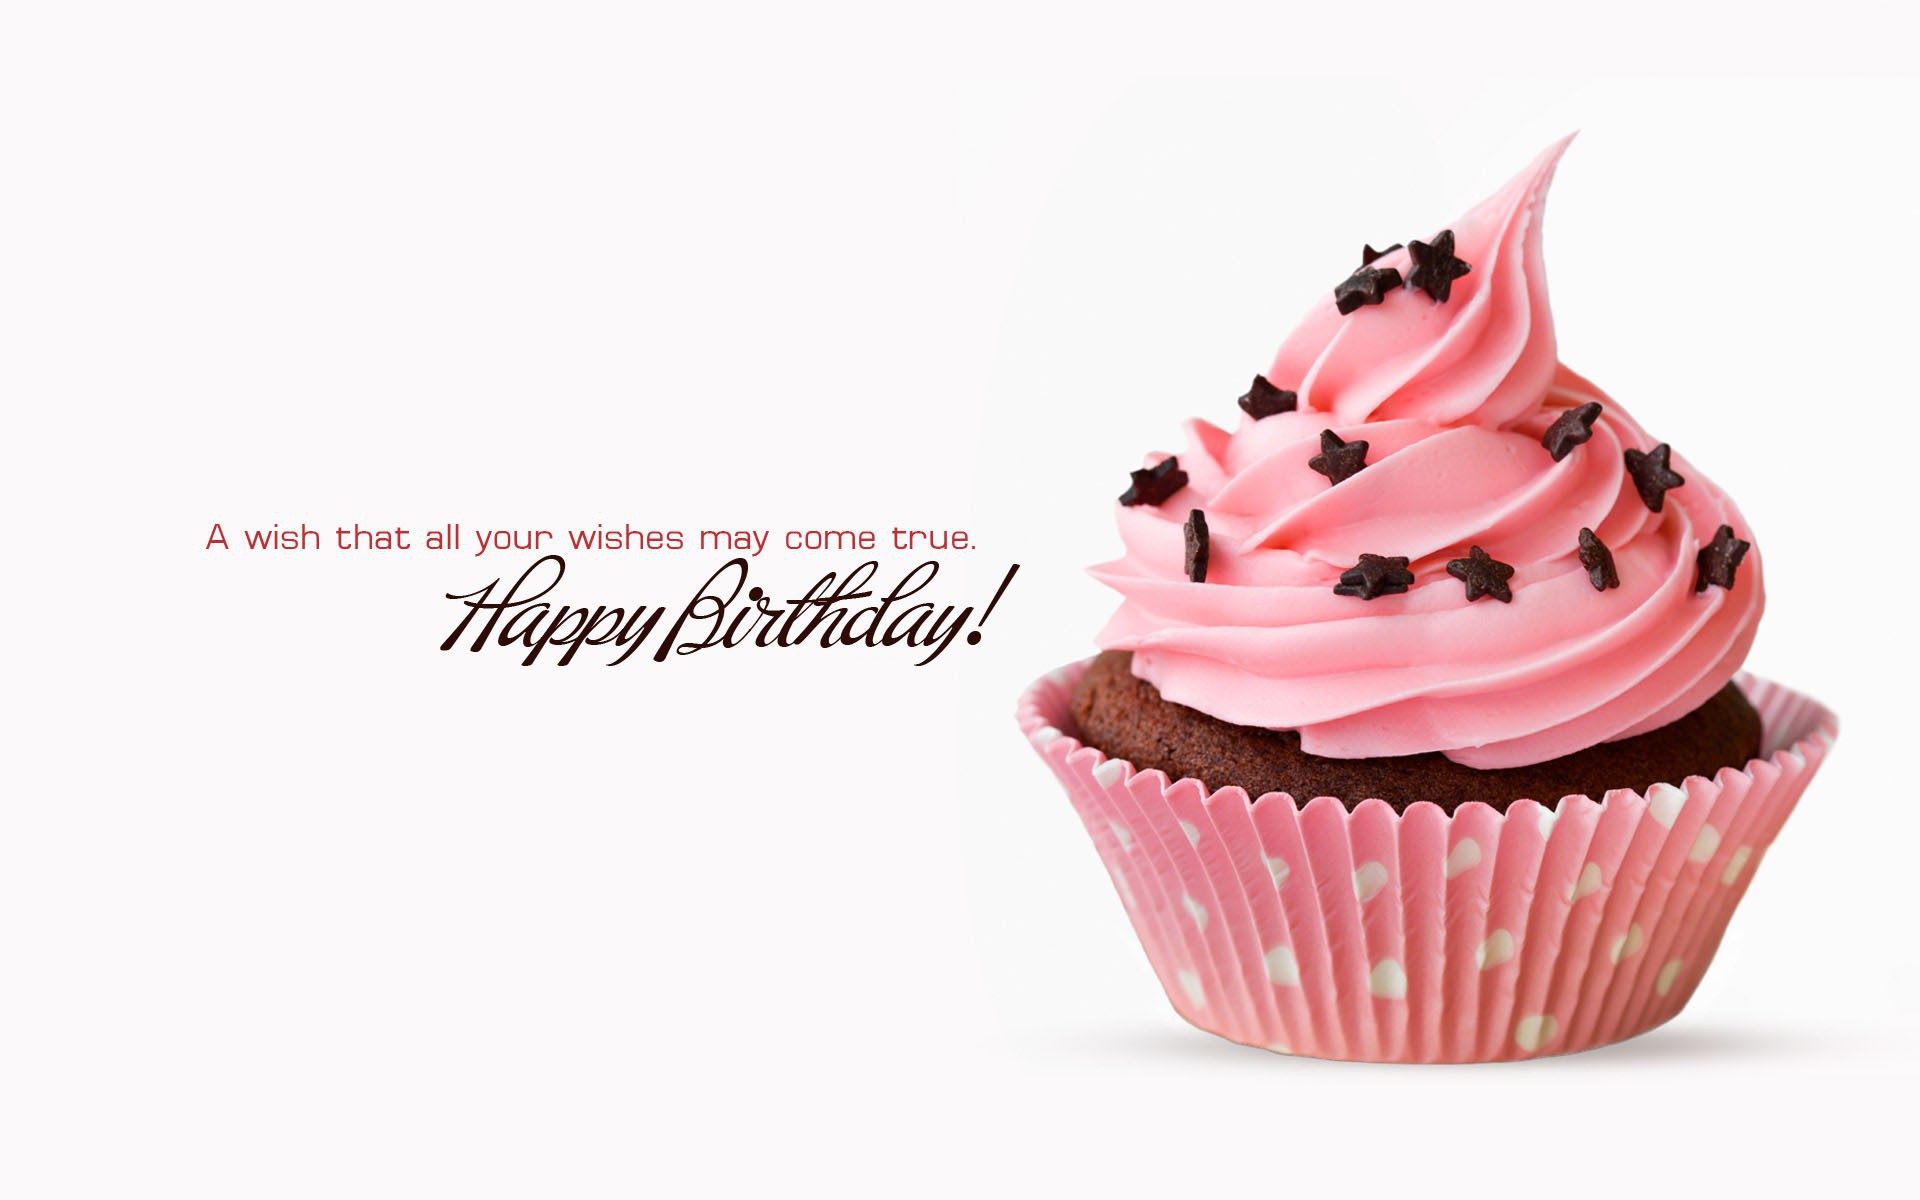 Happy Birthday Wishes Cake Wallpapers   New HD Wallpapers